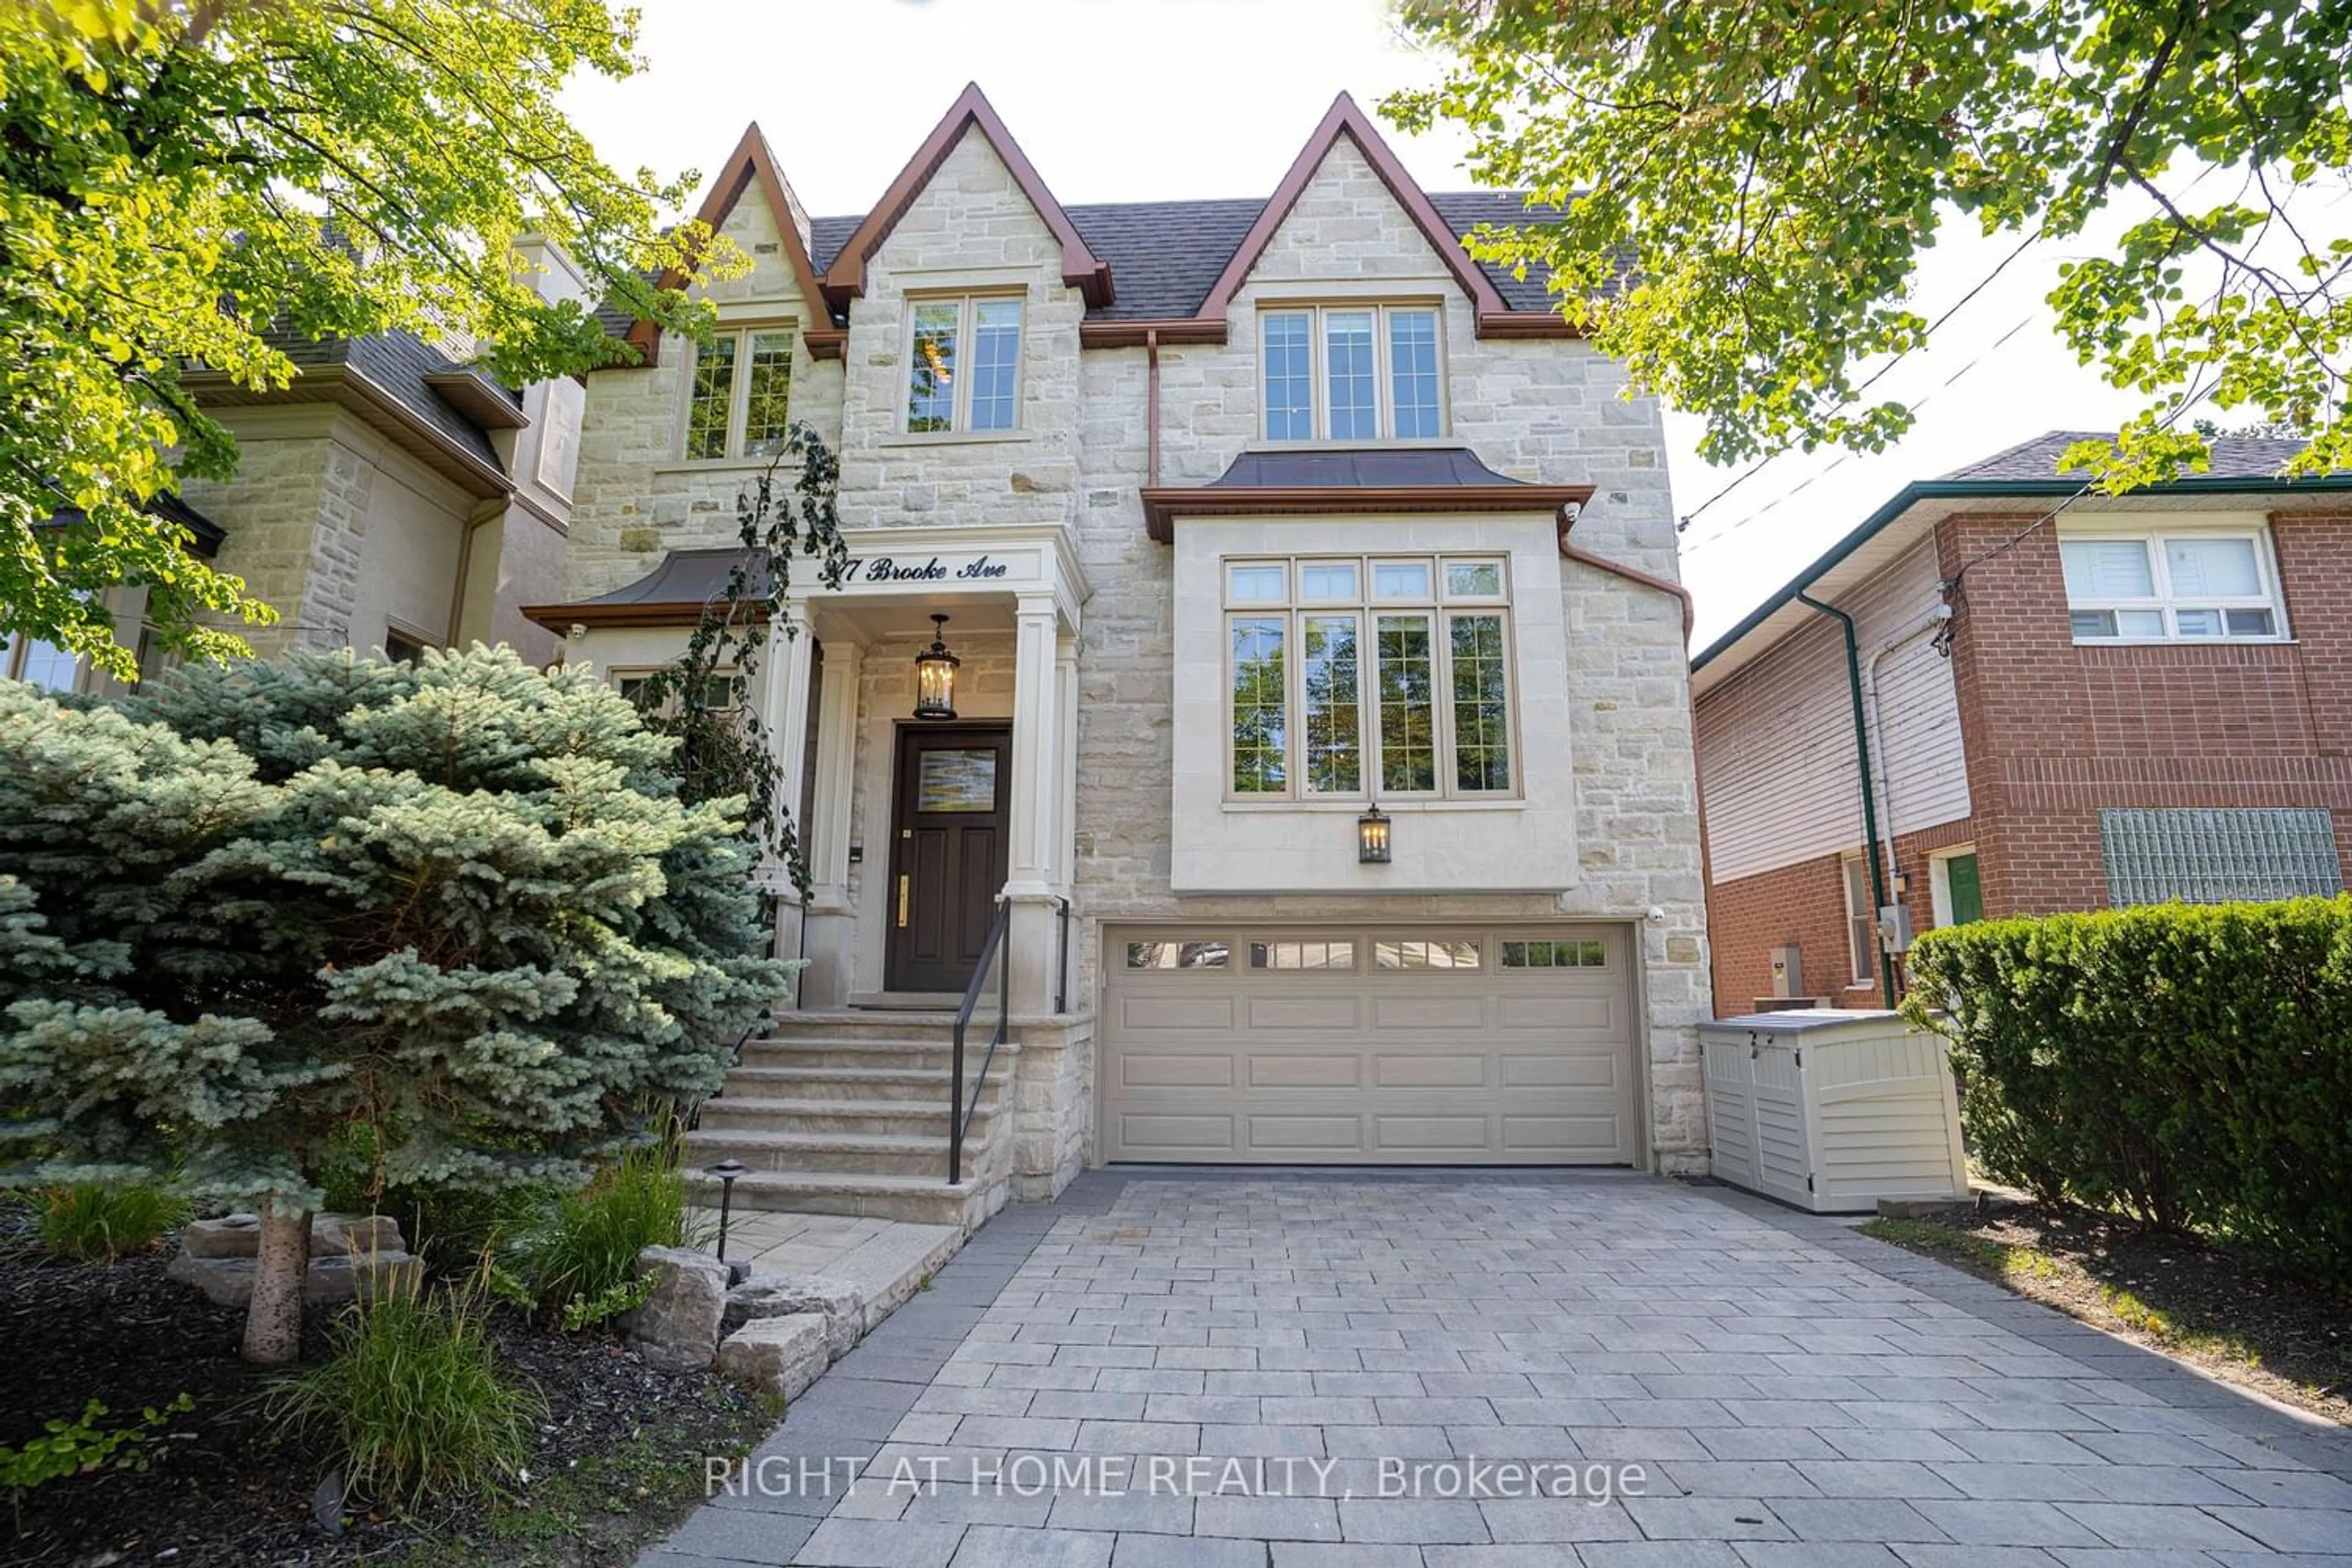 Home with brick exterior material for 377 Brooke Ave, Toronto Ontario M5M 2L5